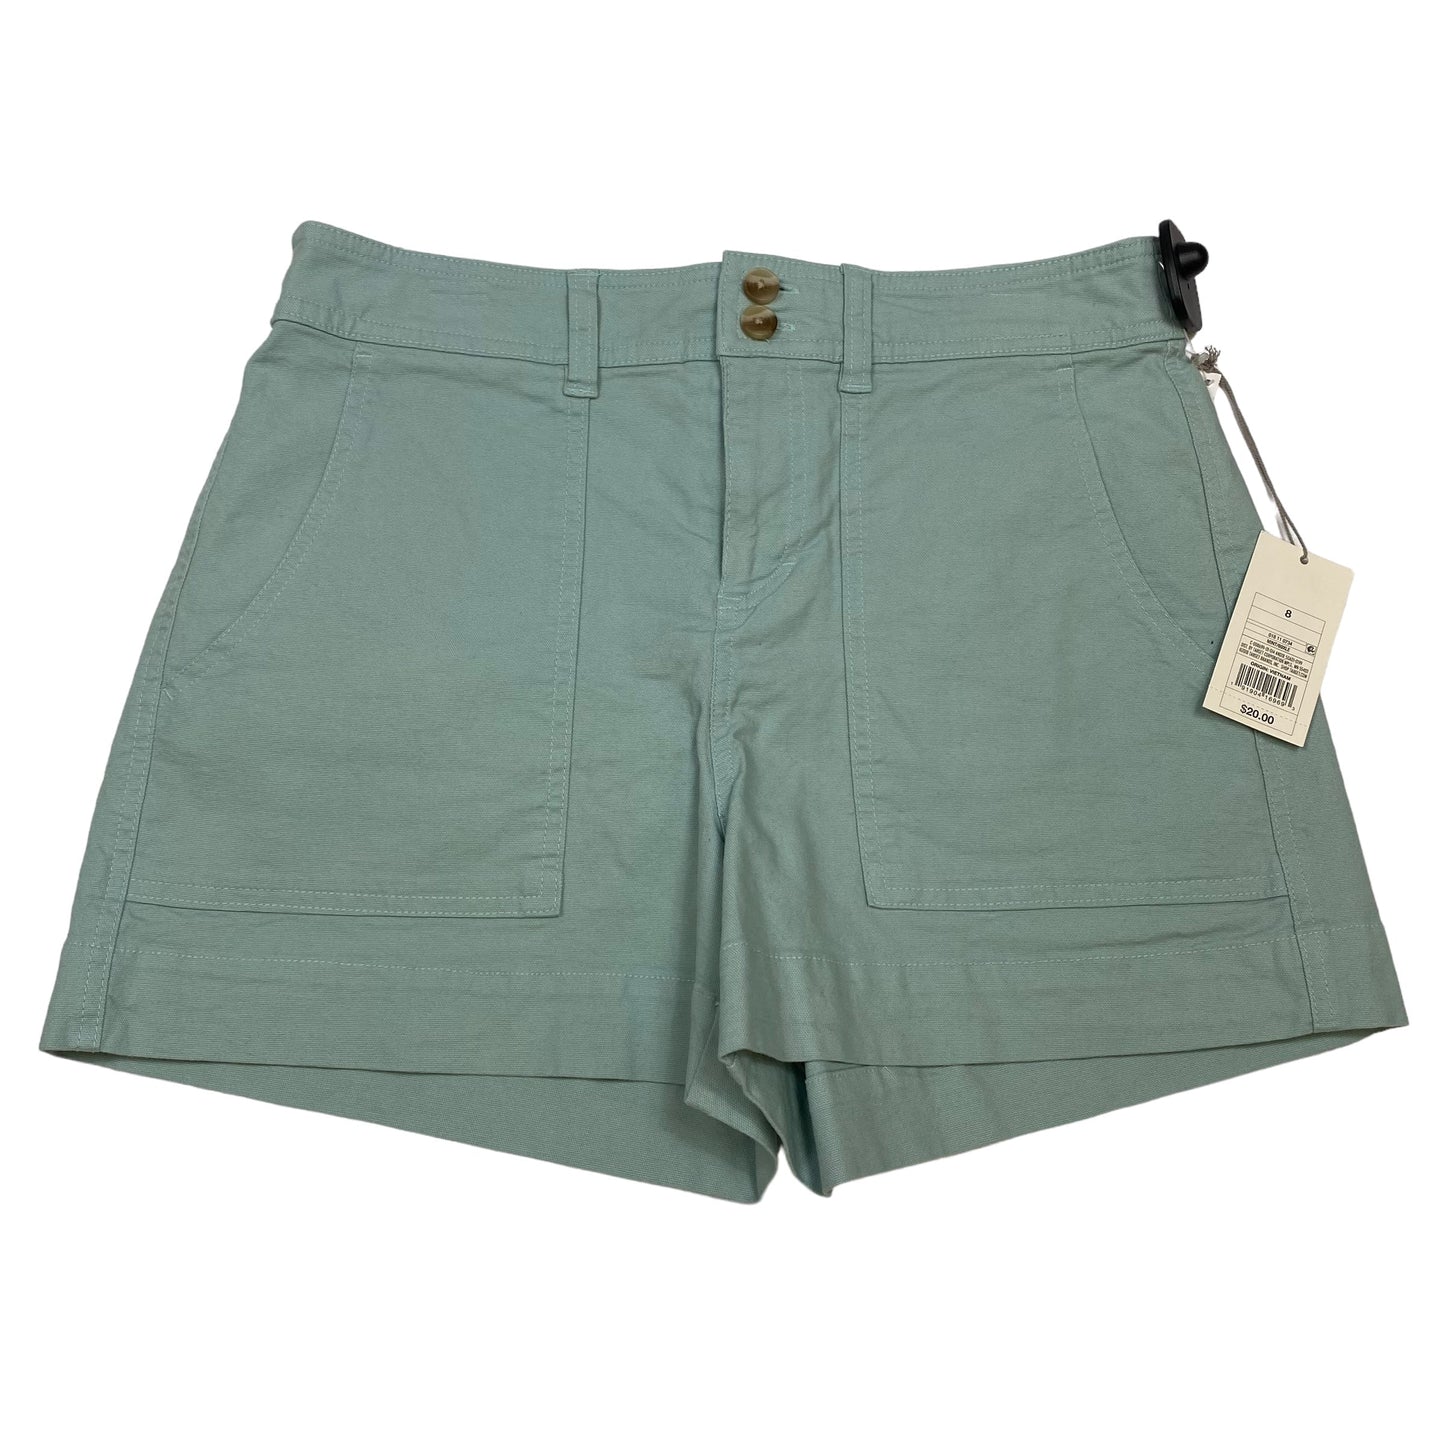 Green Shorts A New Day, Size 8